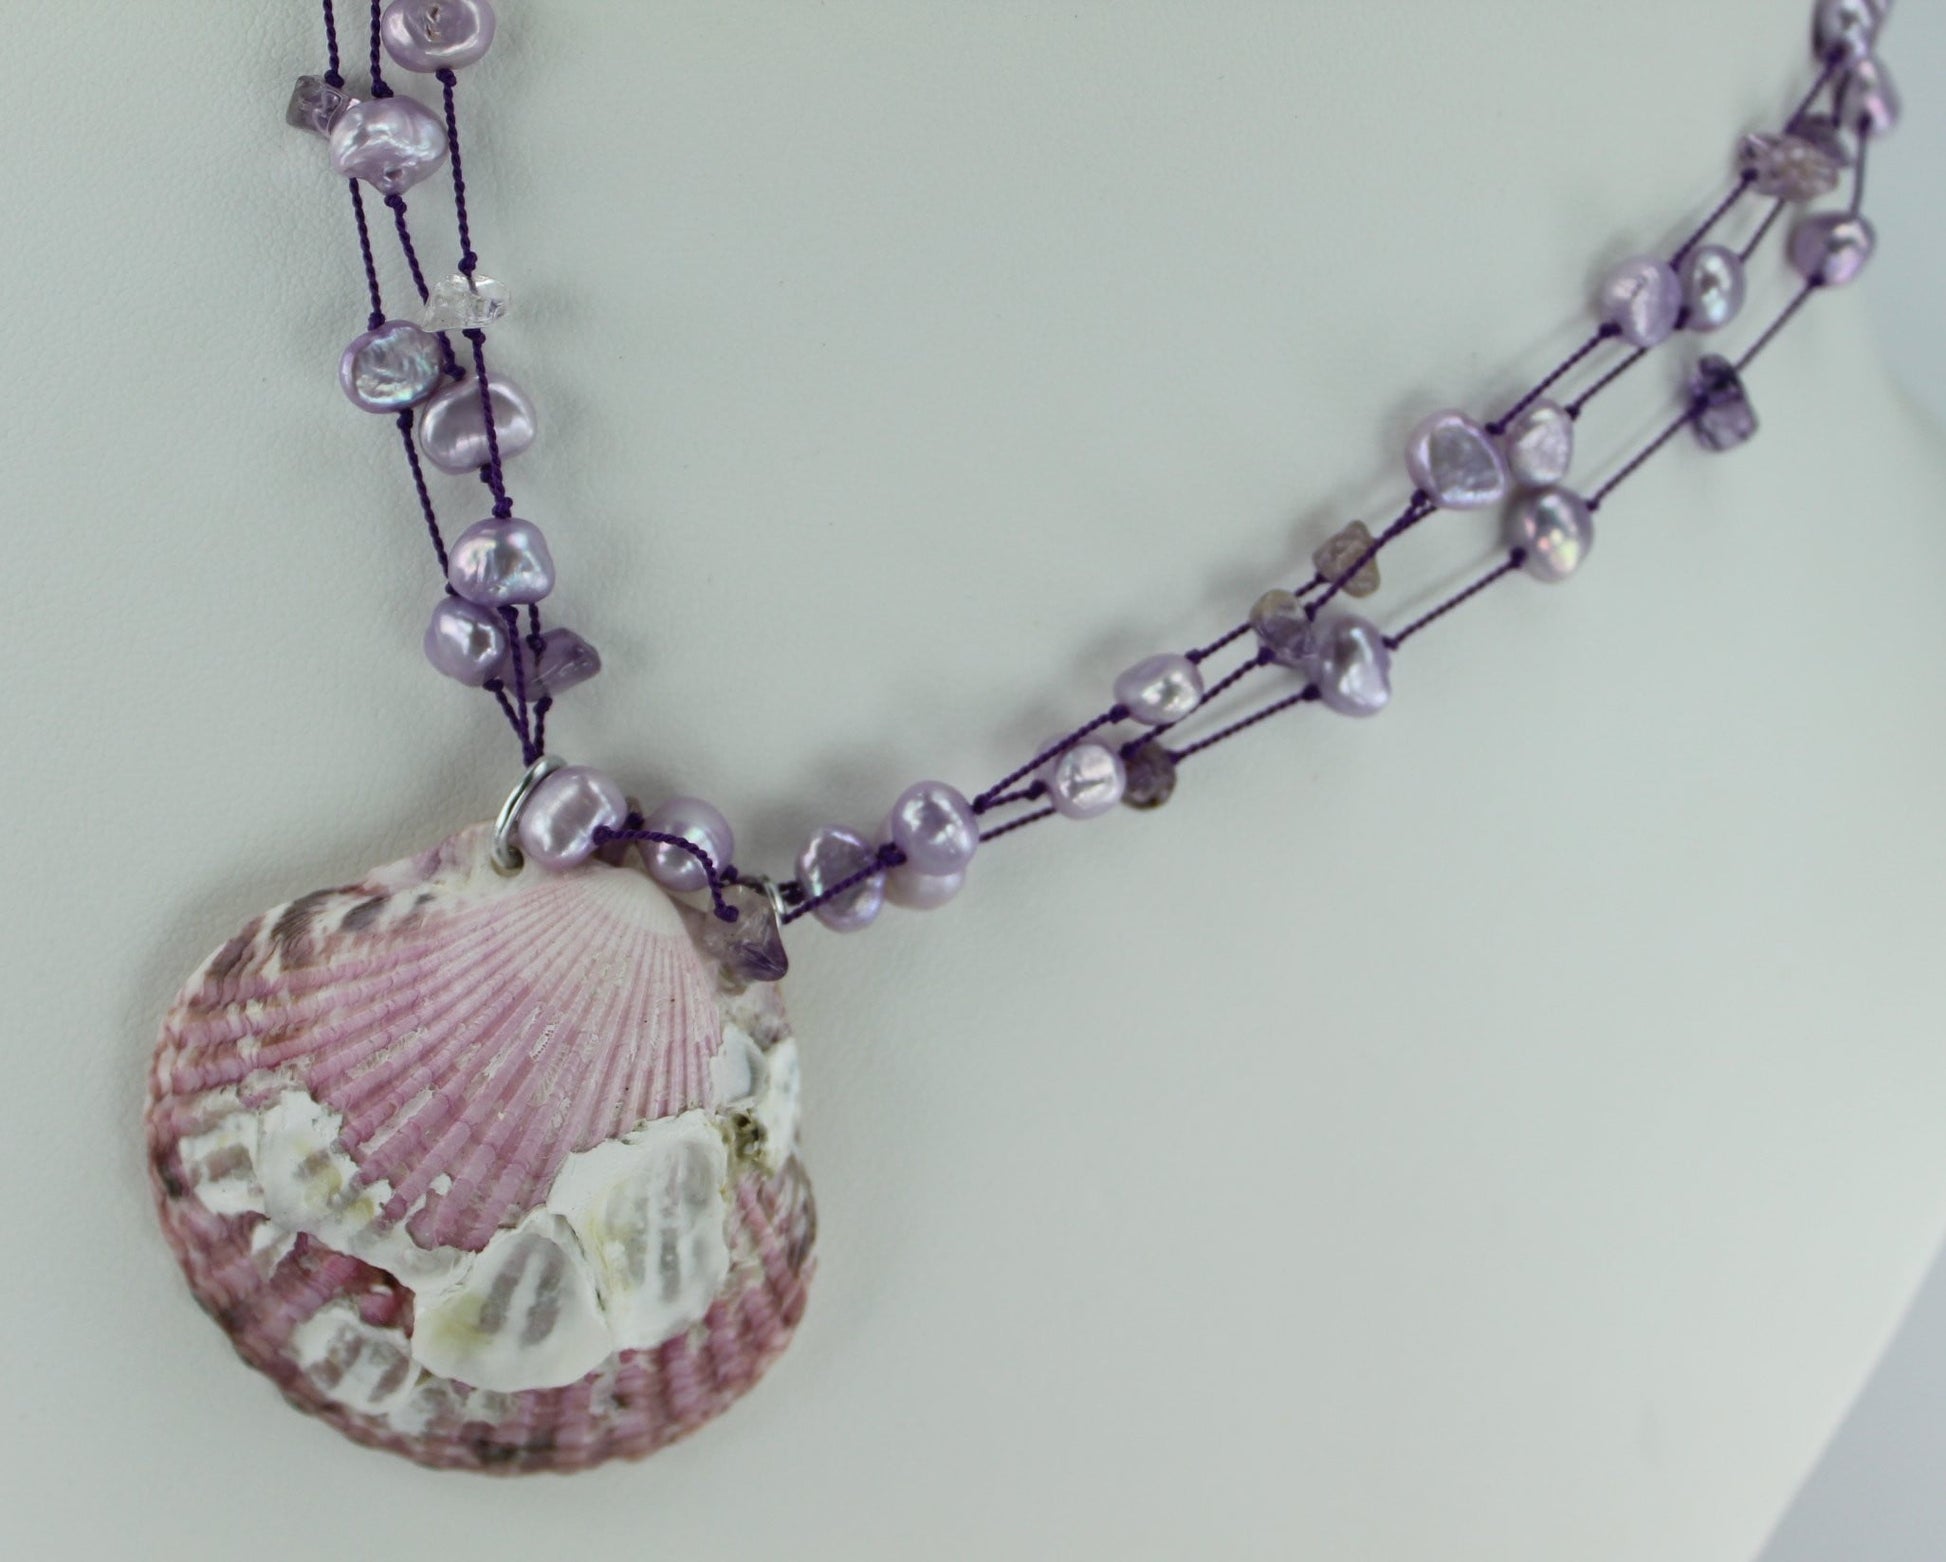 Shell Necklace Purple Scallop Barnacles Beads 17" Organic Natural